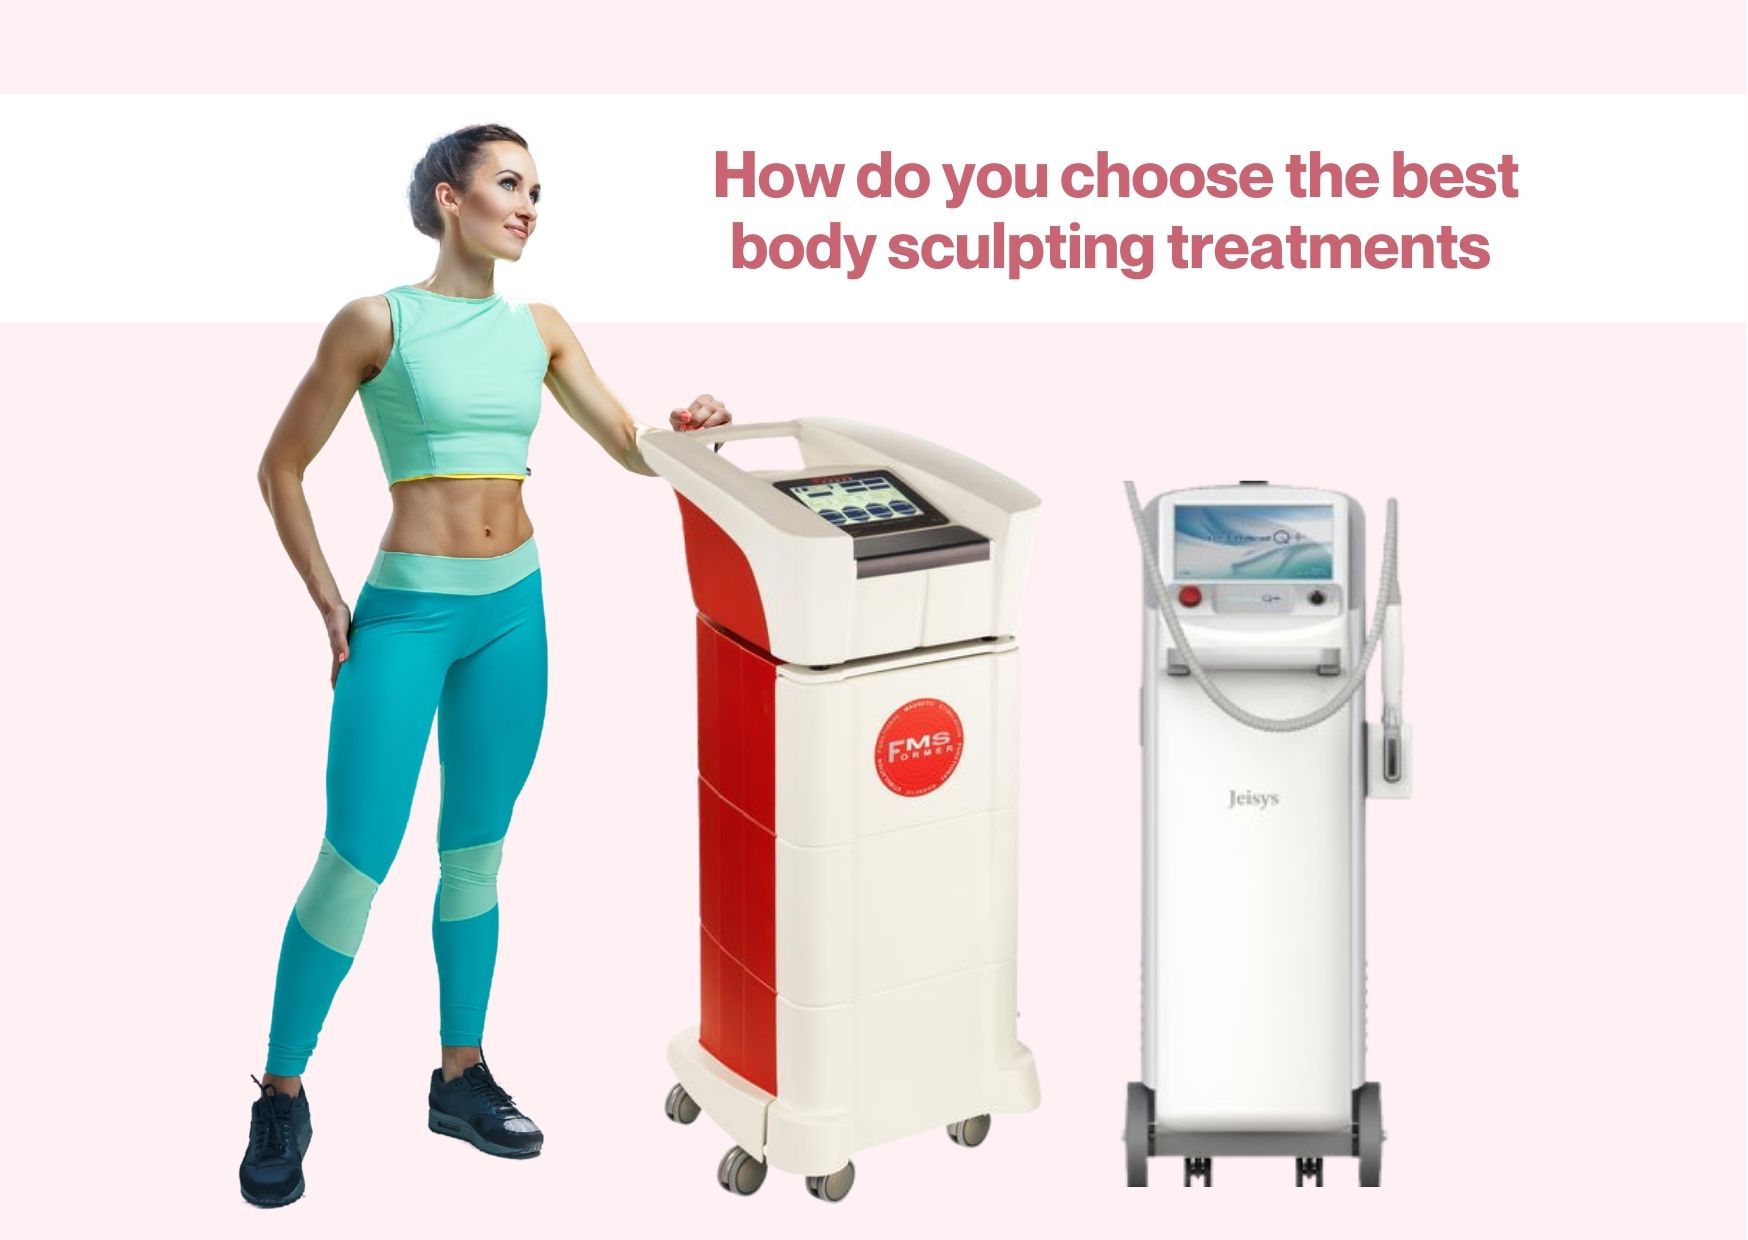 Achieve Your Ideal Body with Non-Surgical Body Contouring